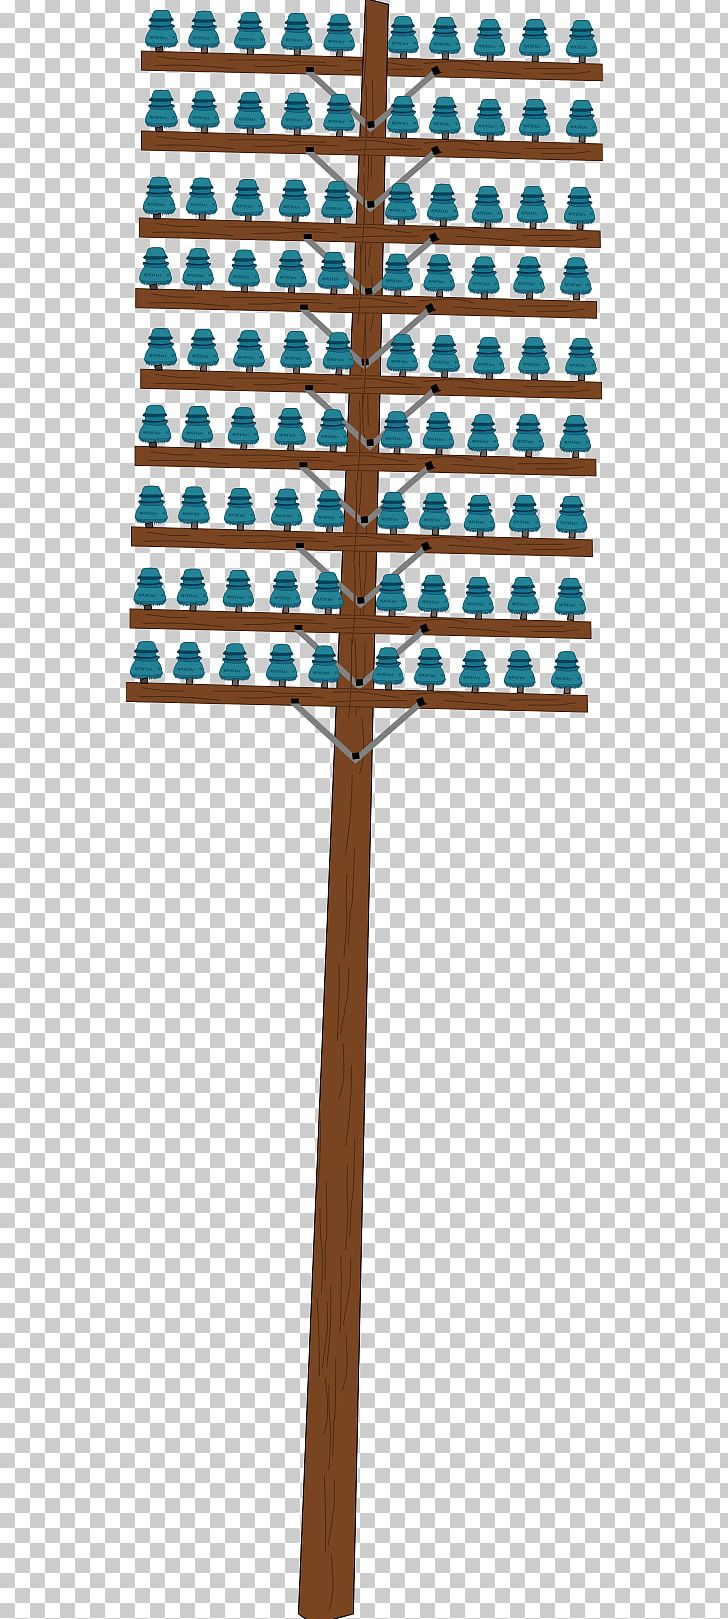 Work Of Art Utility Pole Insulator 1900s PNG, Clipart, 1900s, Angle, Art, Artist, Deviantart Free PNG Download